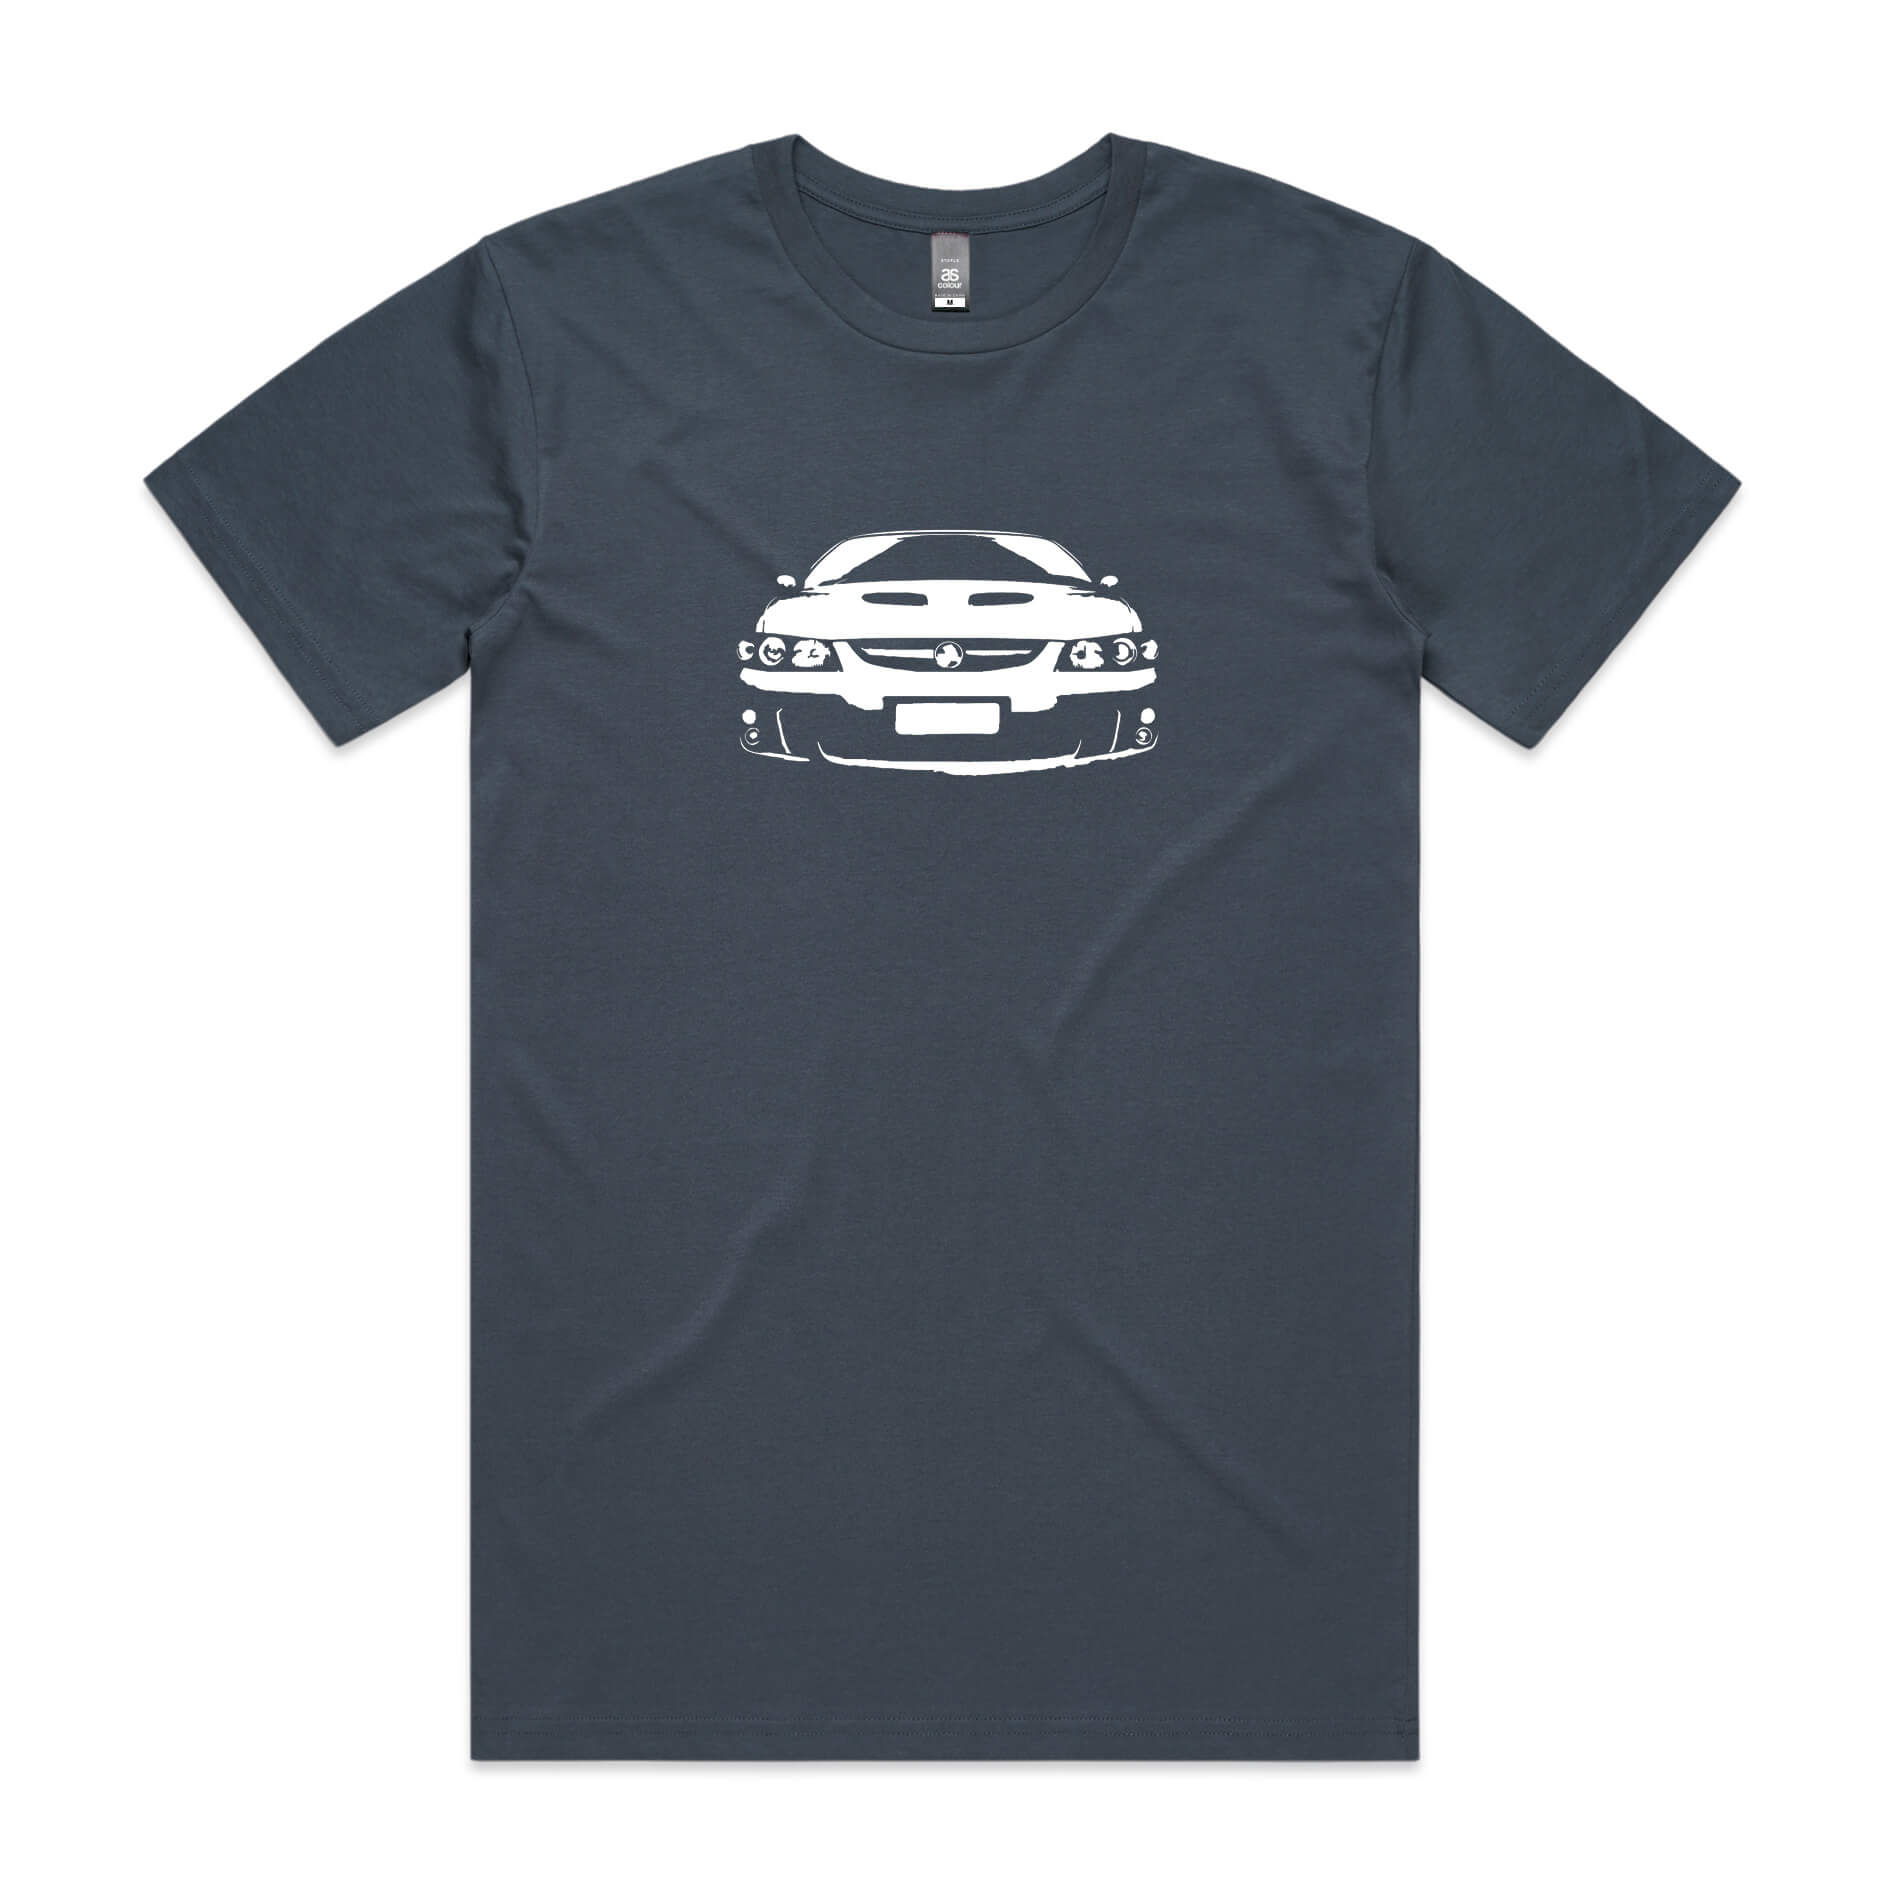 Holden VC8 Monaro t-shirt in petrol blue with white Commodore car graphic